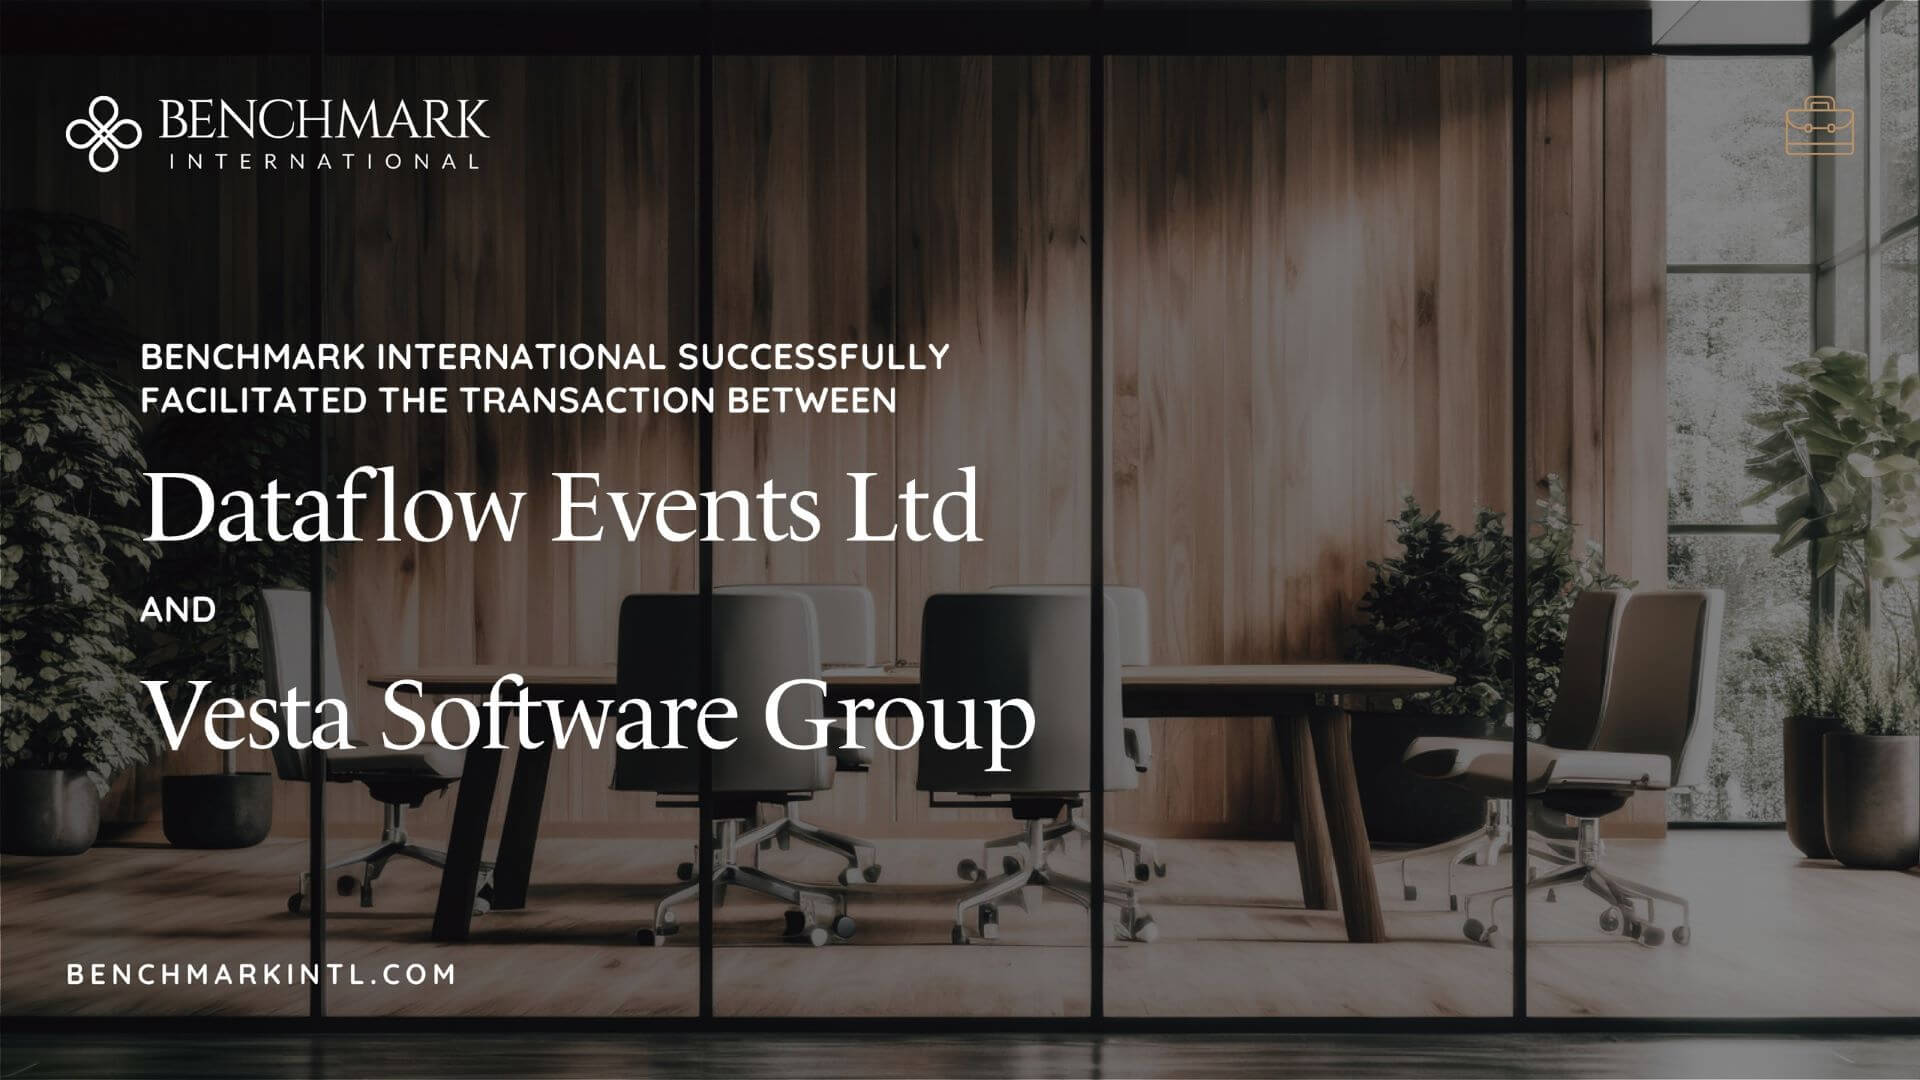 Benchmark International Successfully Facilitated the Transaction Between Dataflow Events Ltd and Vesta Software Group